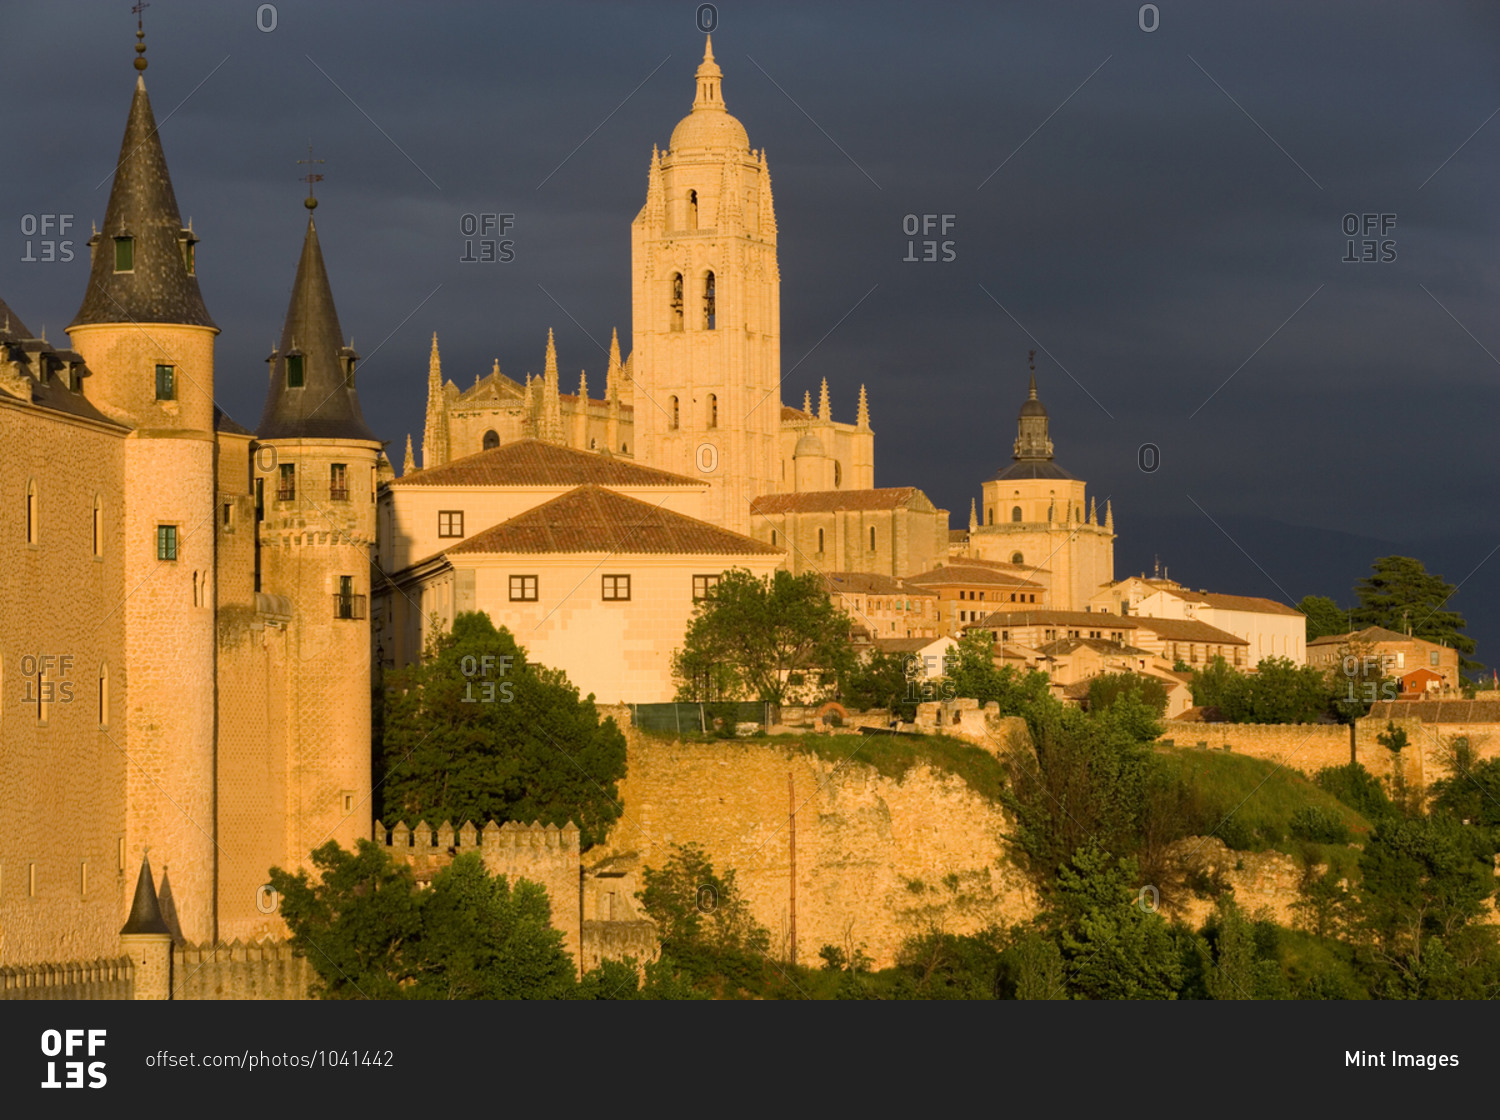 Exterior view of the Alc�zar of Segovia, a medieval castle in the city of Segovia, Castile and Leon, Spain.